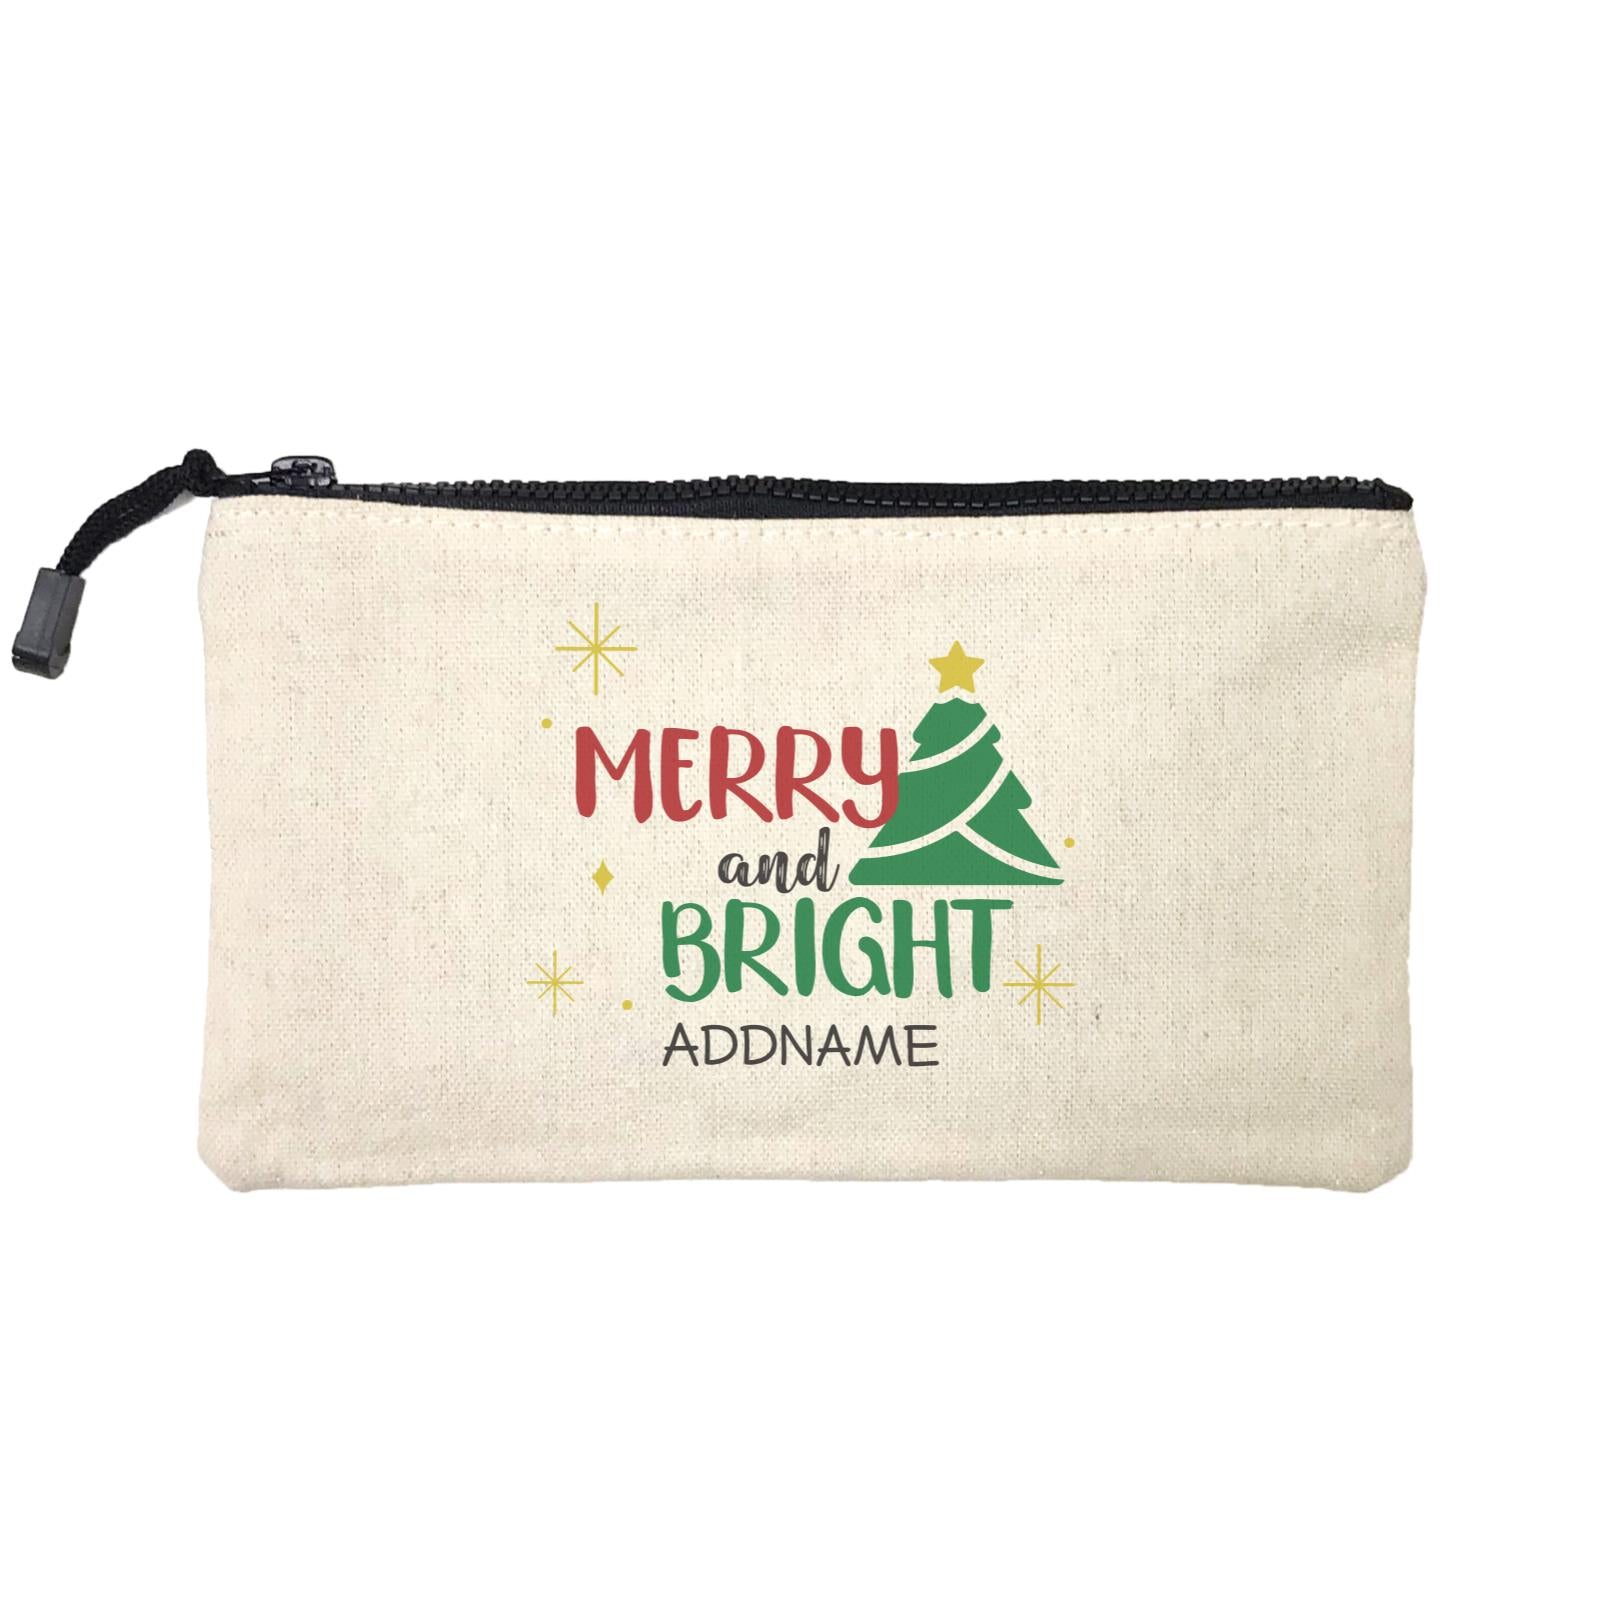 Xmas Merry and Bright with Christmas Tree Mini Accessories Stationery Pouch